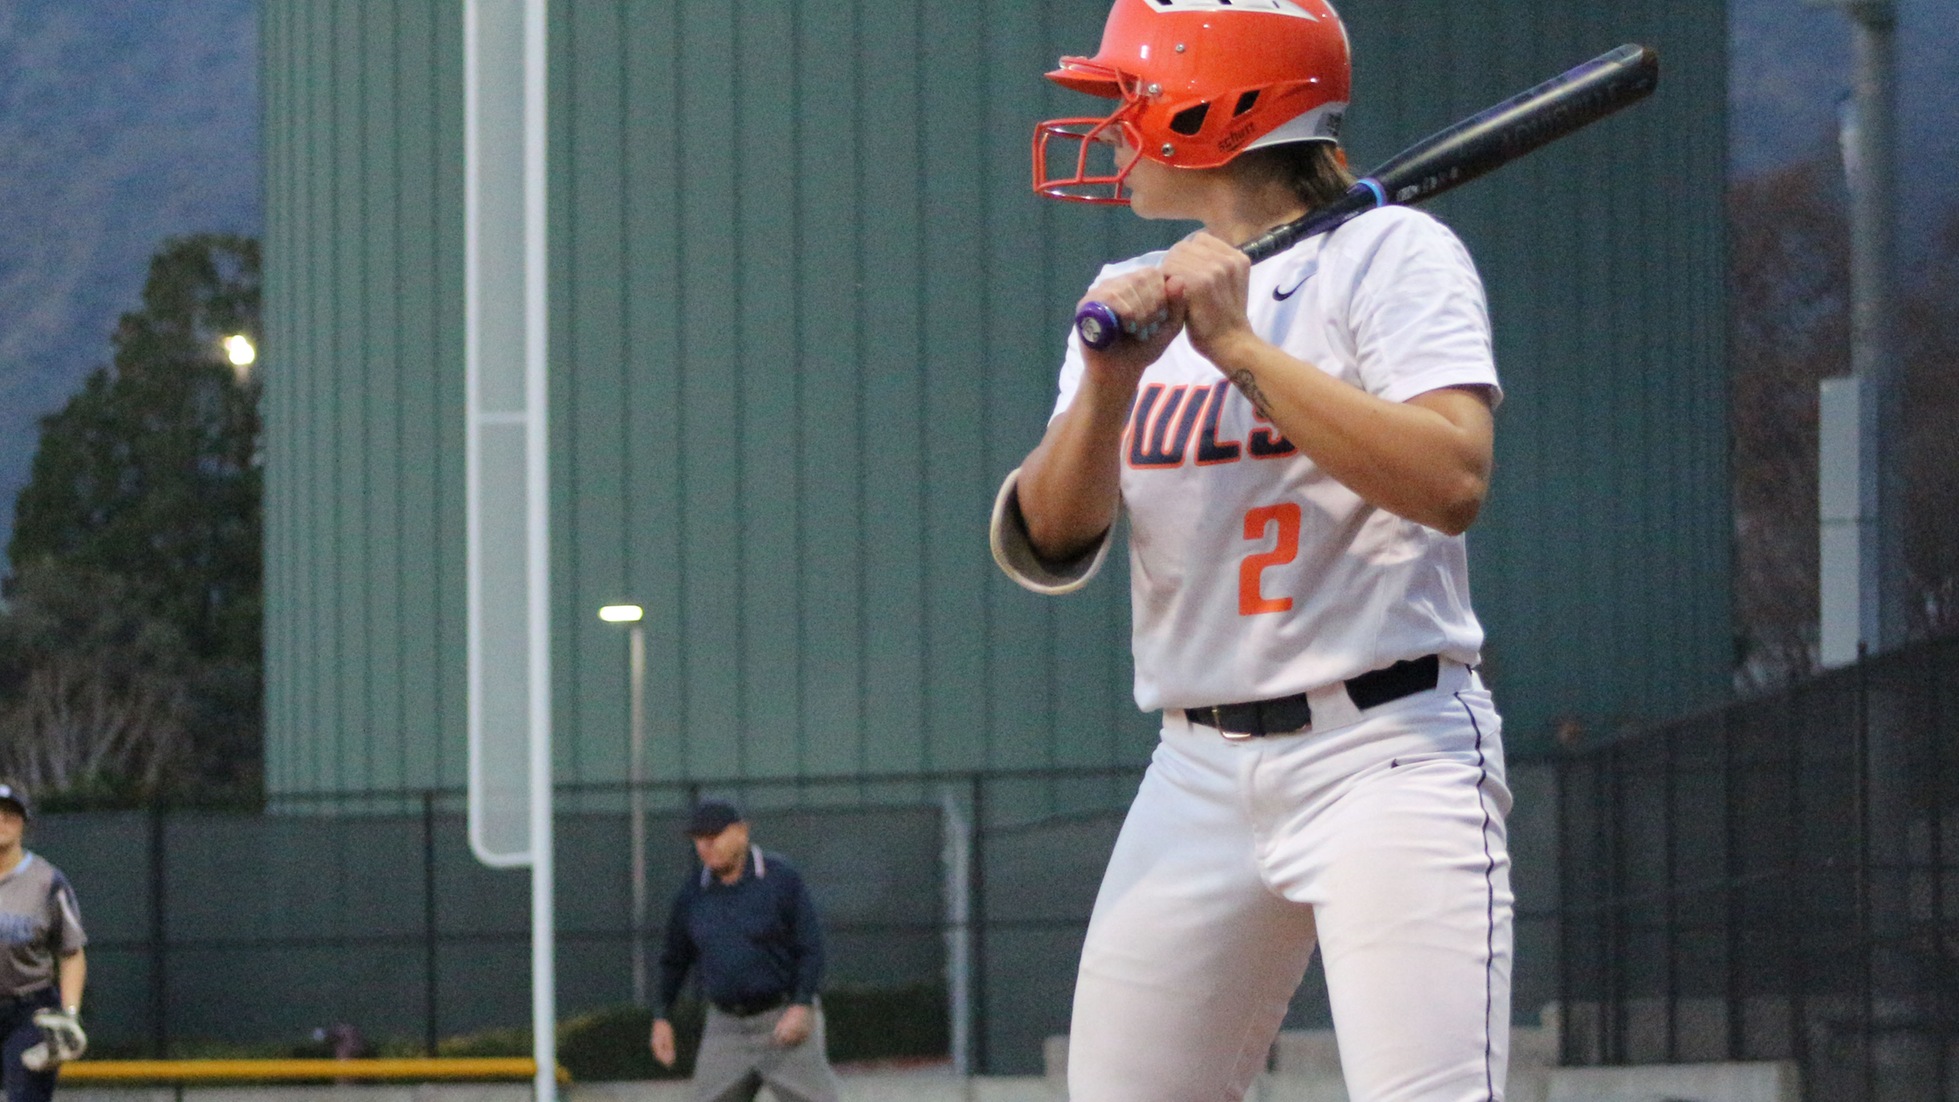 Hailee Reinert had a strong showing at the plate, finishing 2-for-3 with an RBI and a run scored. Photo by: Brianna Jara